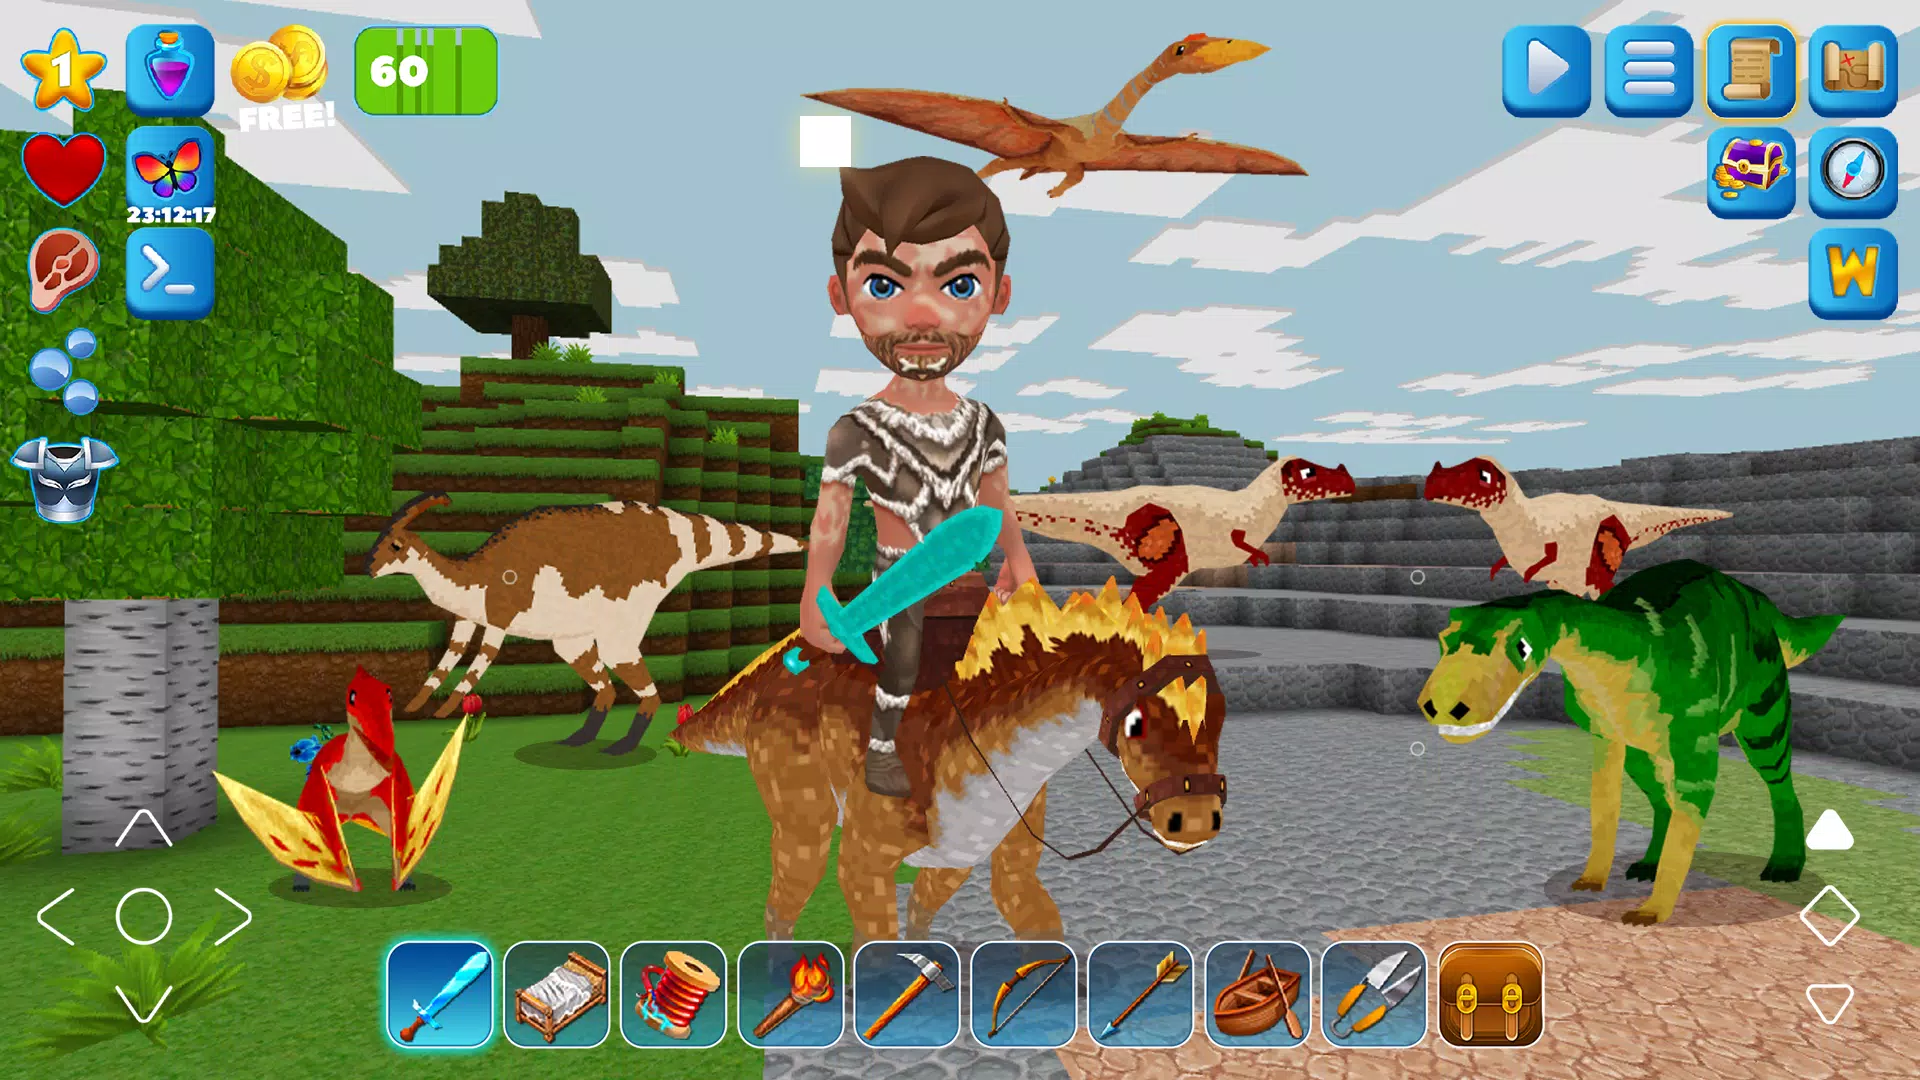 Survivalcraft Demo for Android - Download the APK from Uptodown